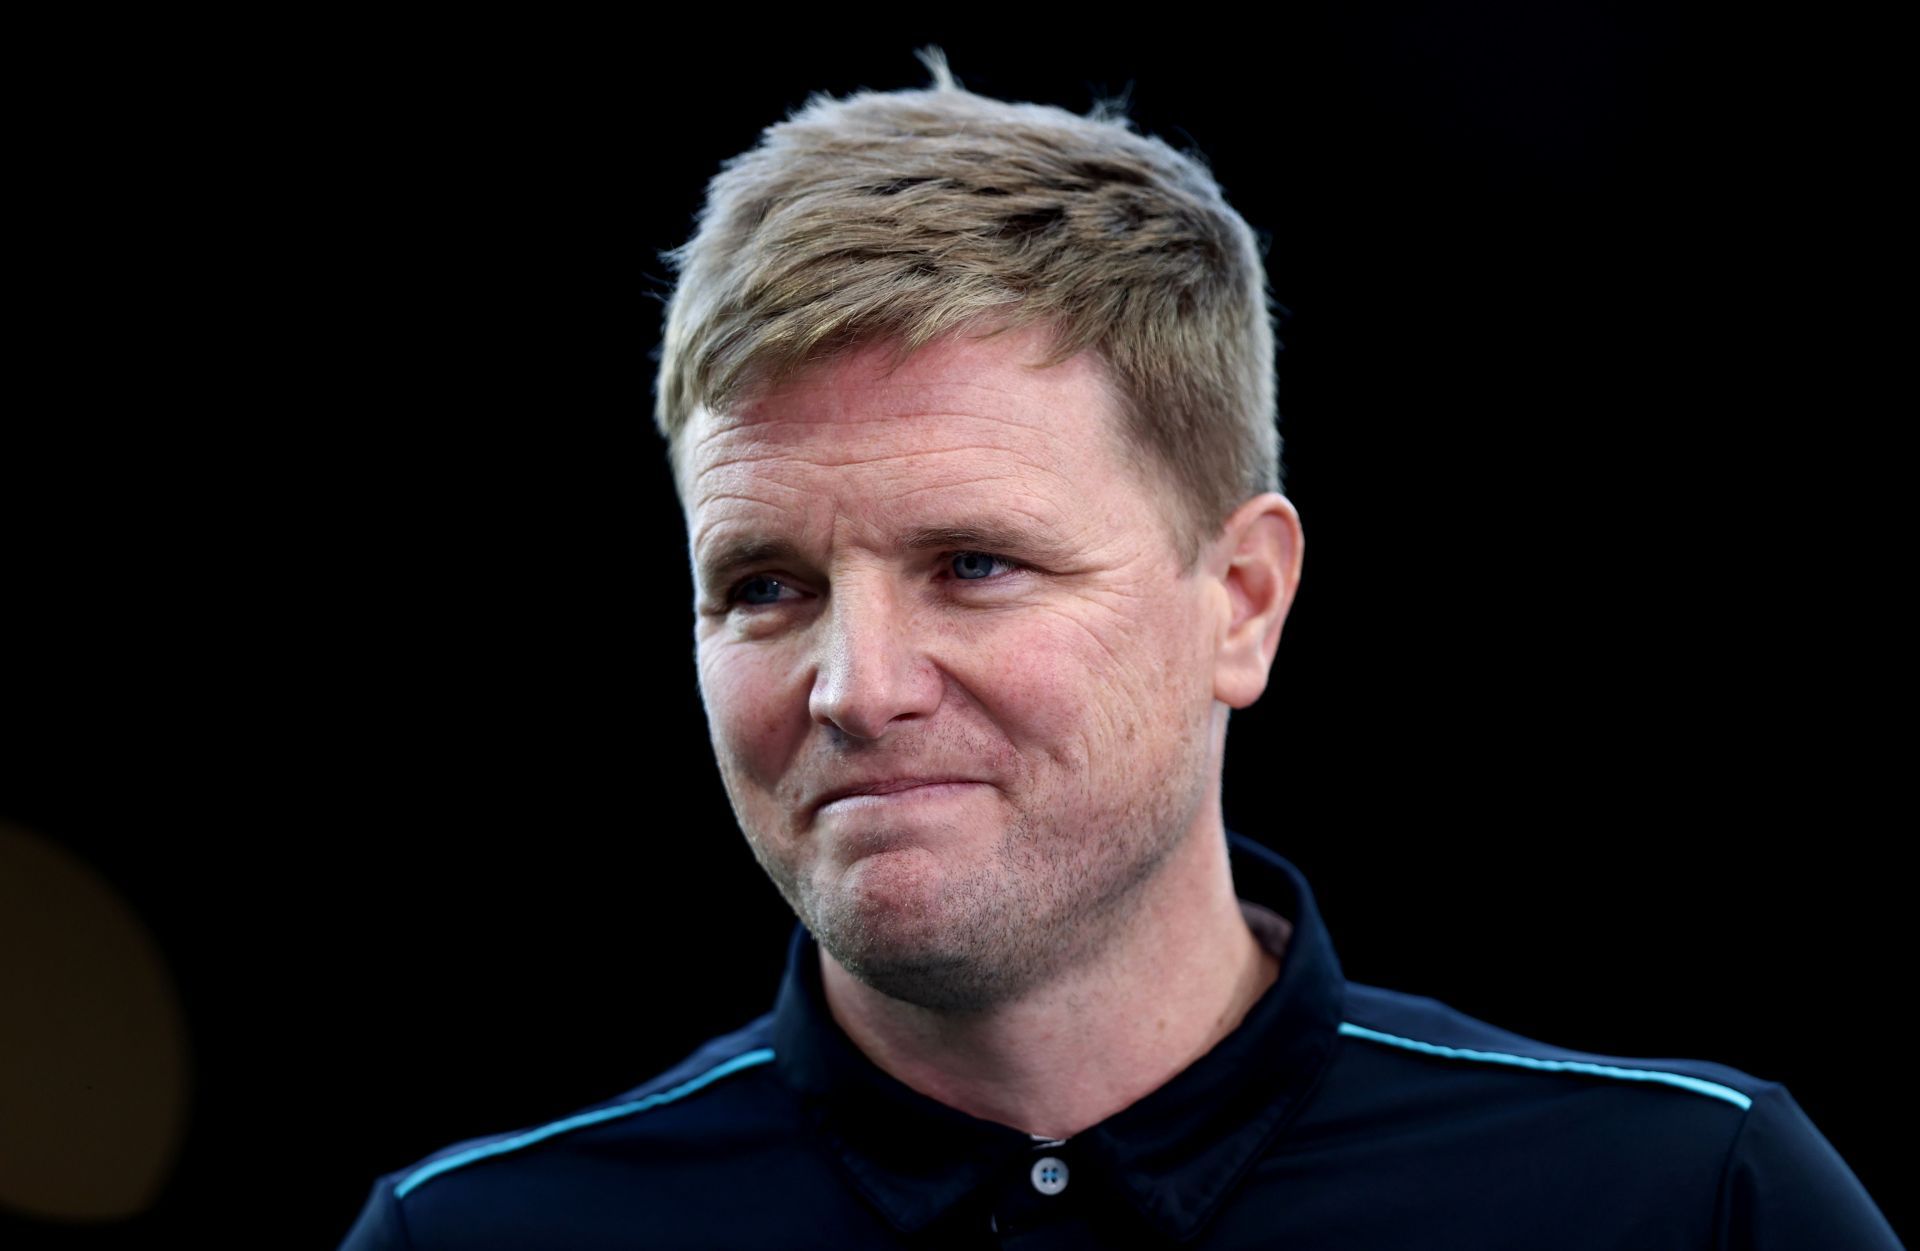 Manager Eddie Howe will hope to spend big in the summer trasnfer window